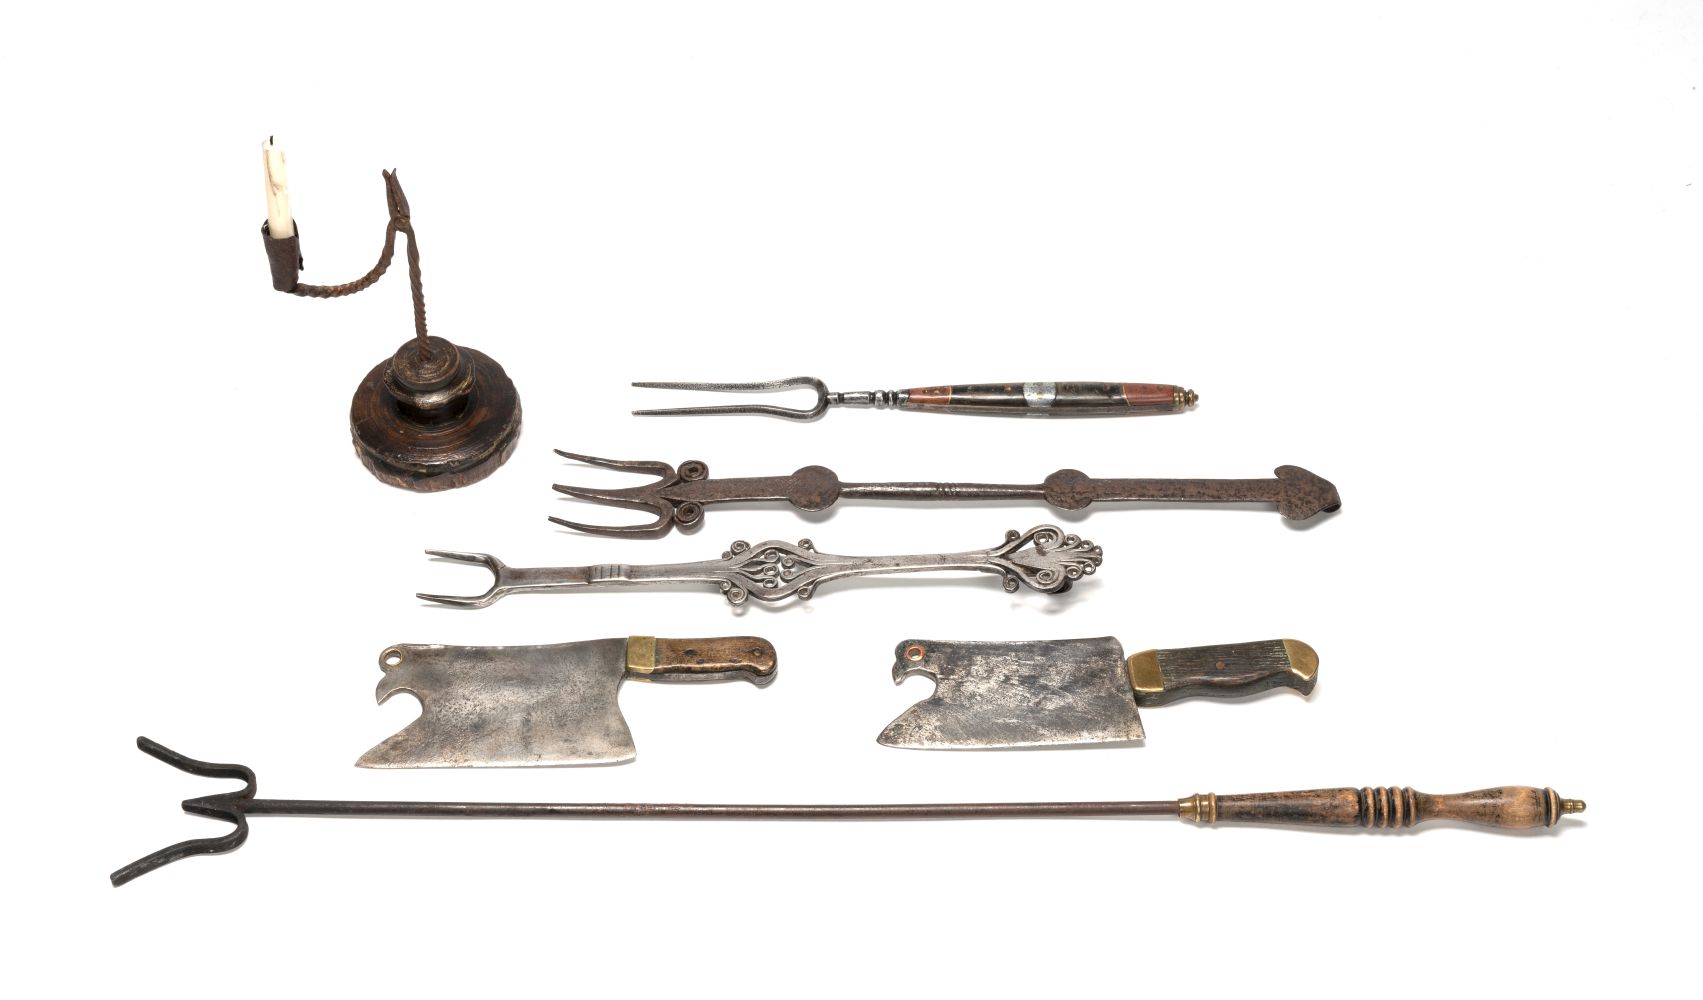 AN 18TH CENTURY RUSHNIP WITH CANDLE HOLDER TOGETHER WITH A COLLECTION OF KITCHEN TOOLS (7)